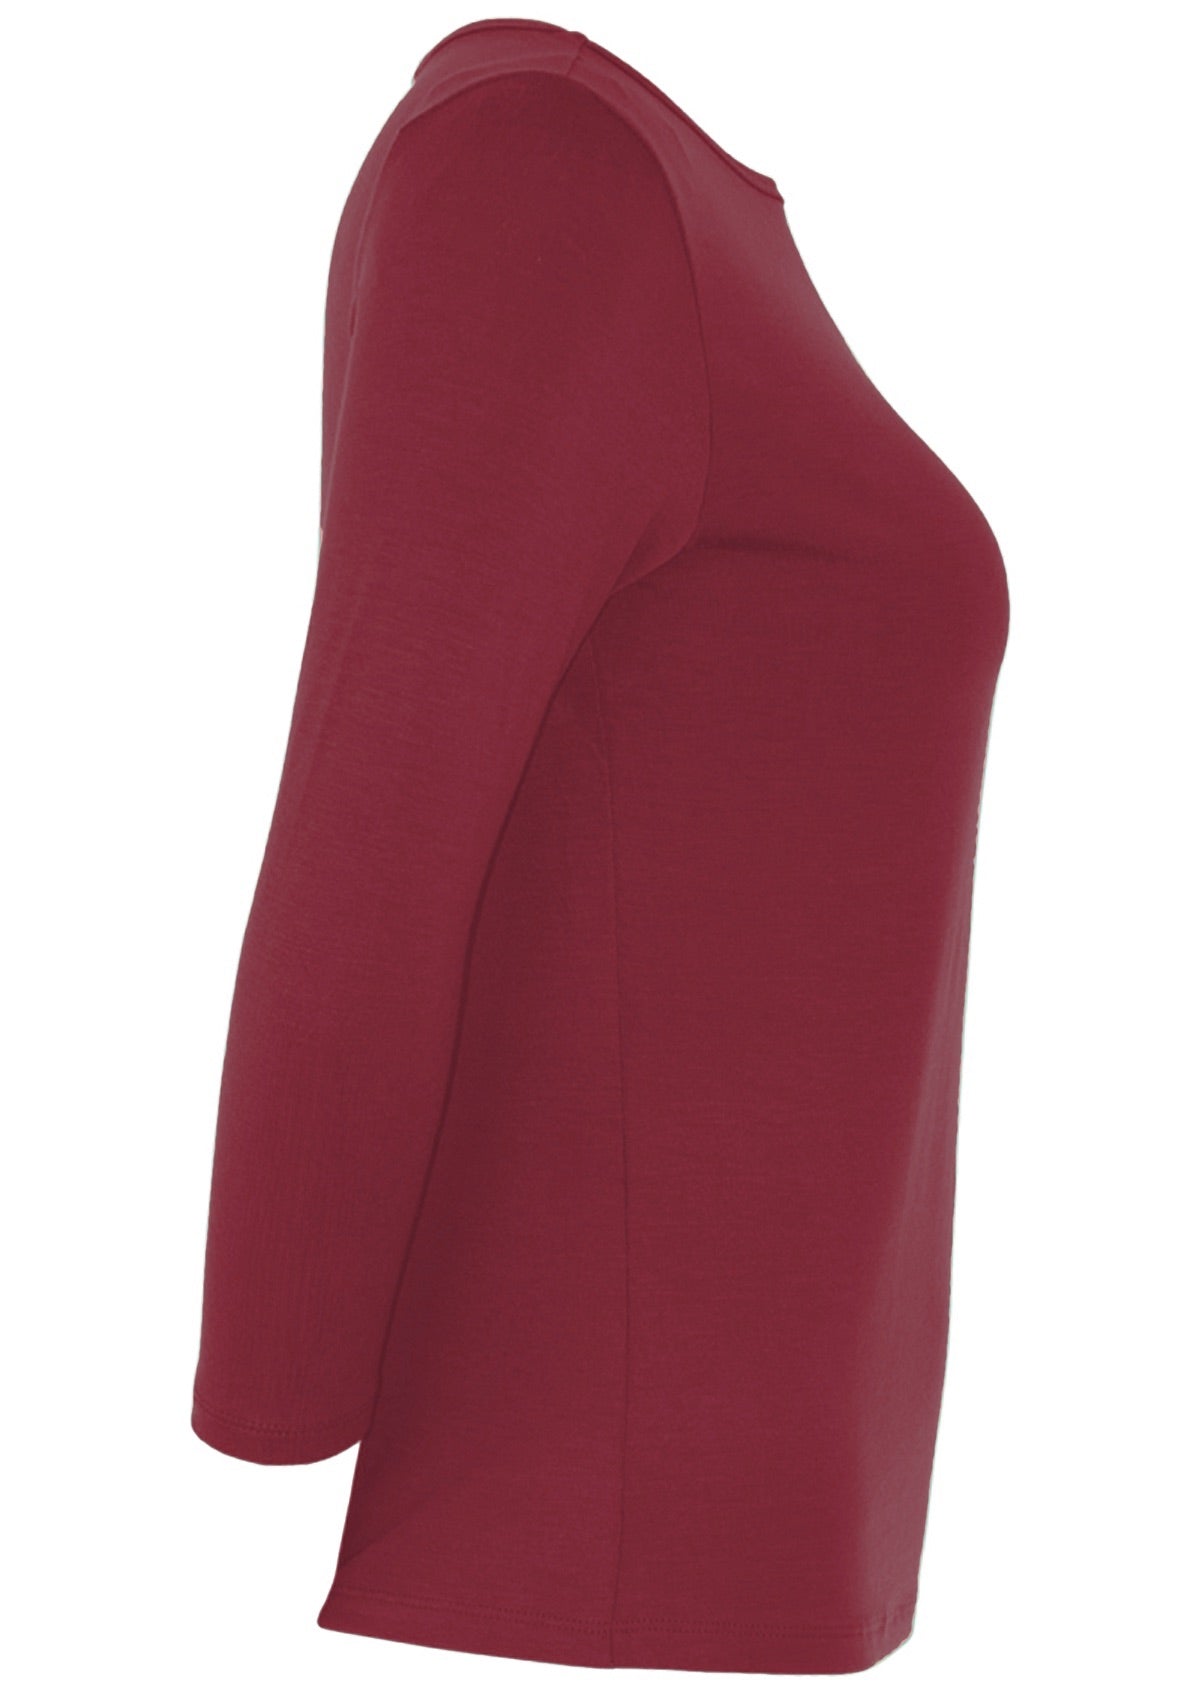 Side view of women's rayon boat neck maroon 3/4 sleeve top.